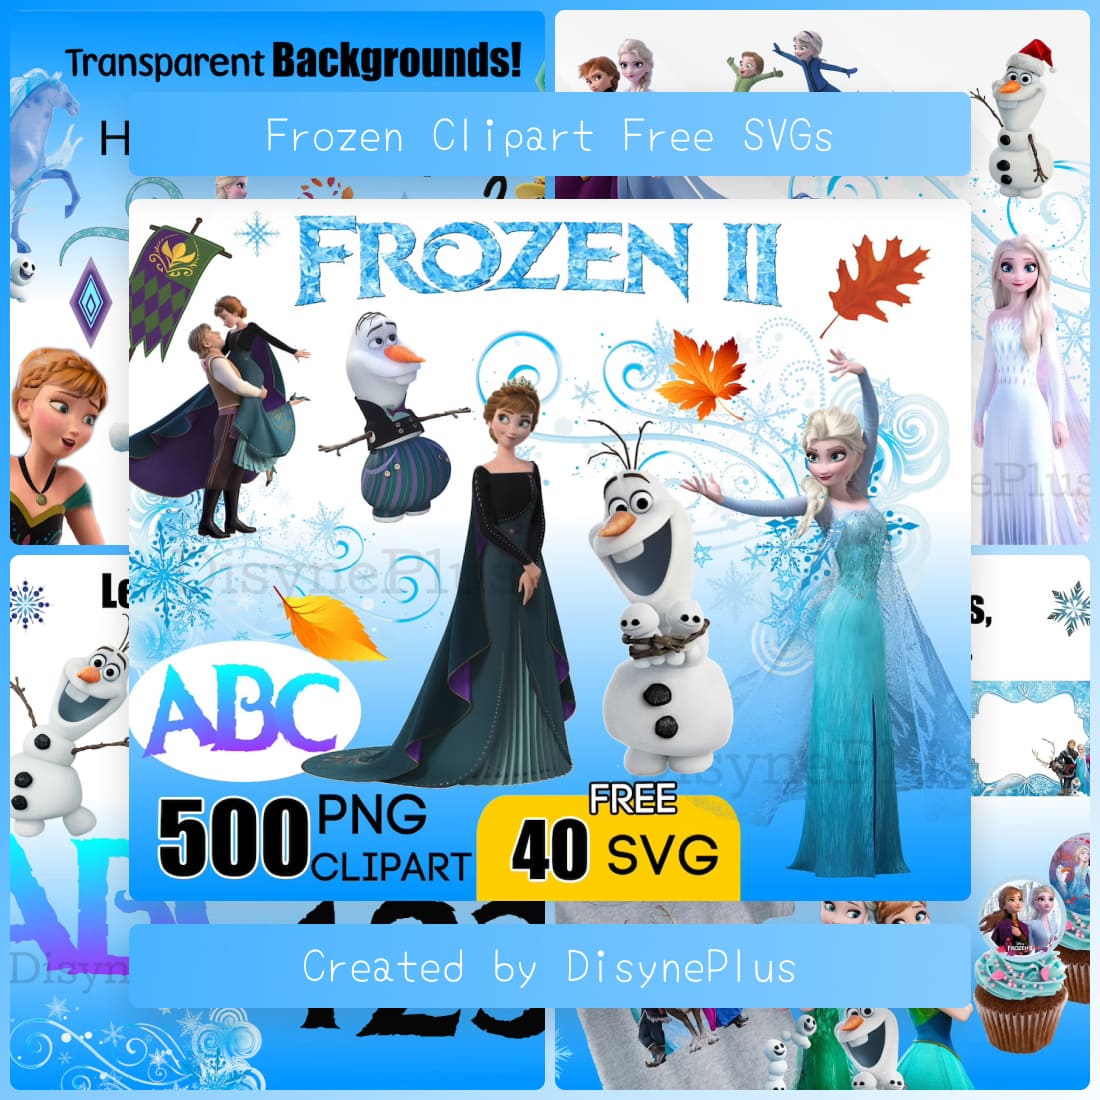 Frozen Clipart Free SVGs.